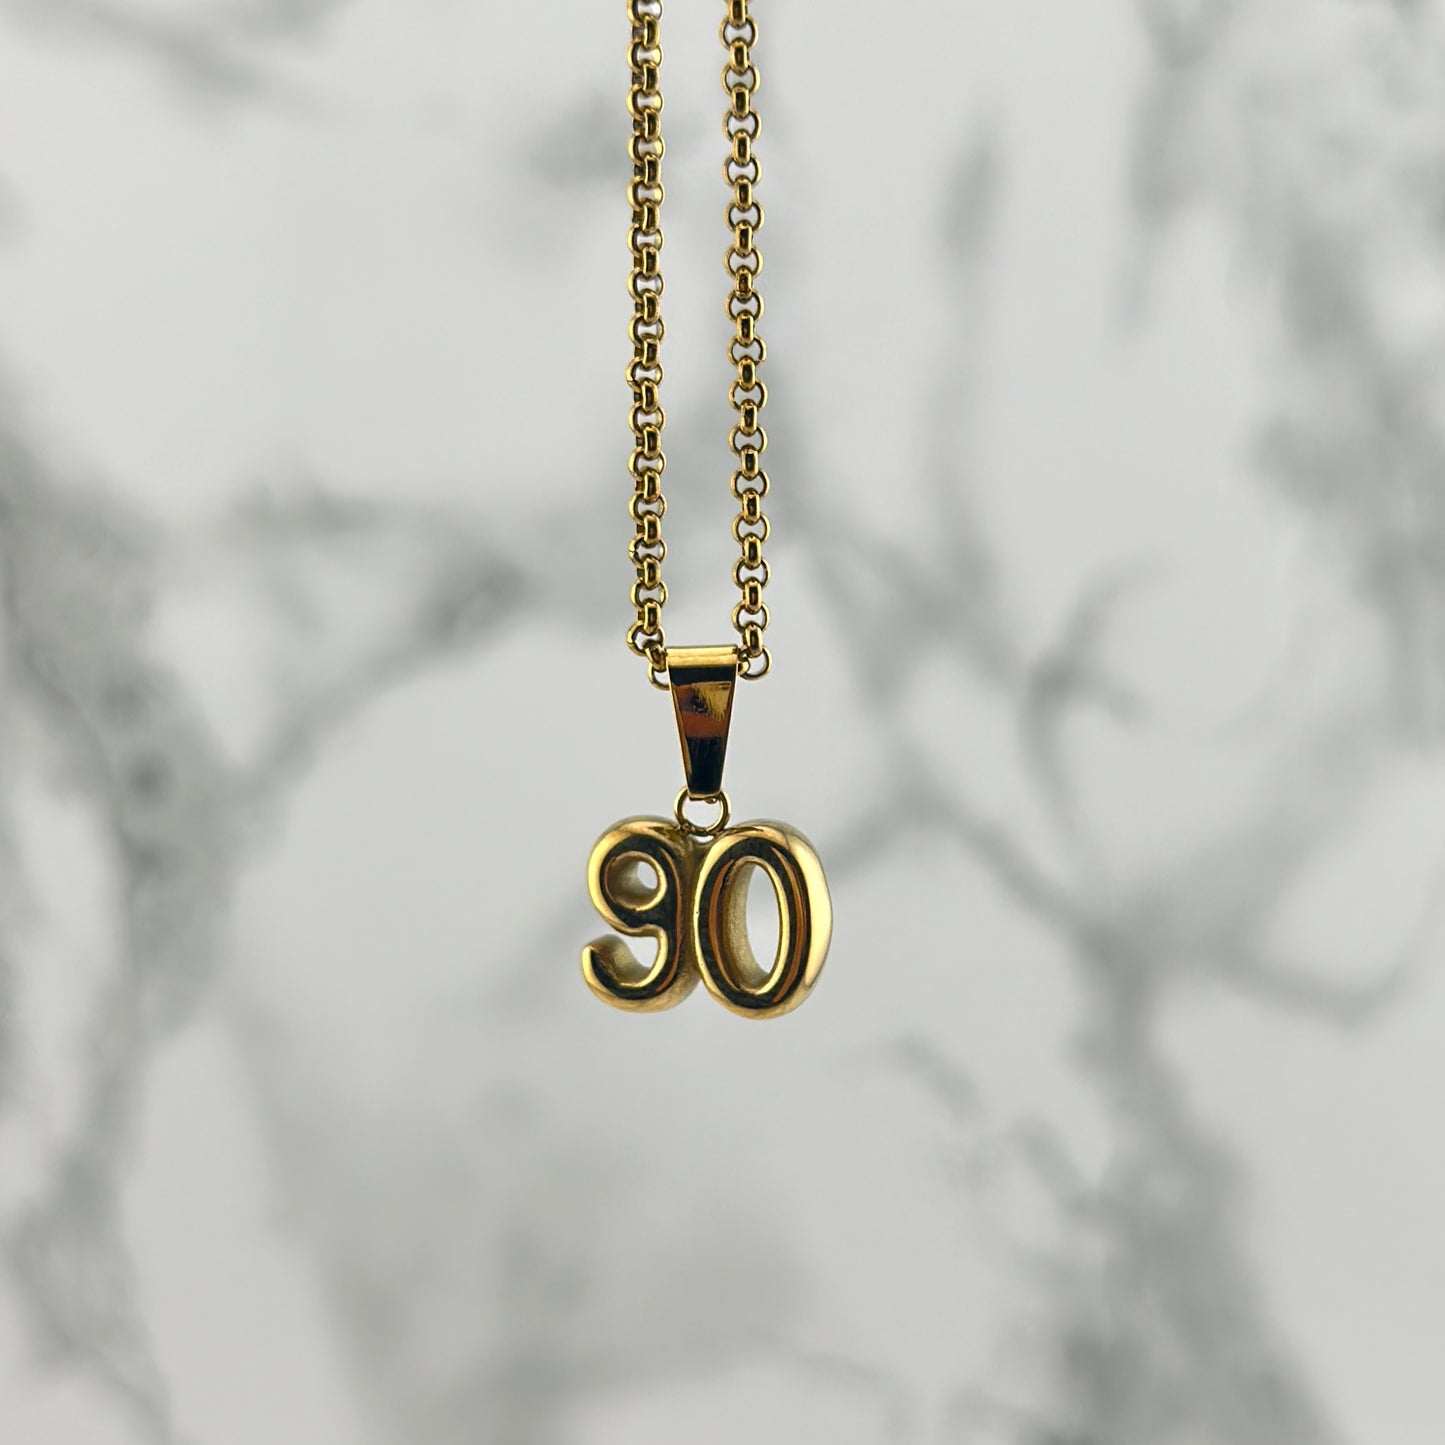 Nineties personalized Necklace